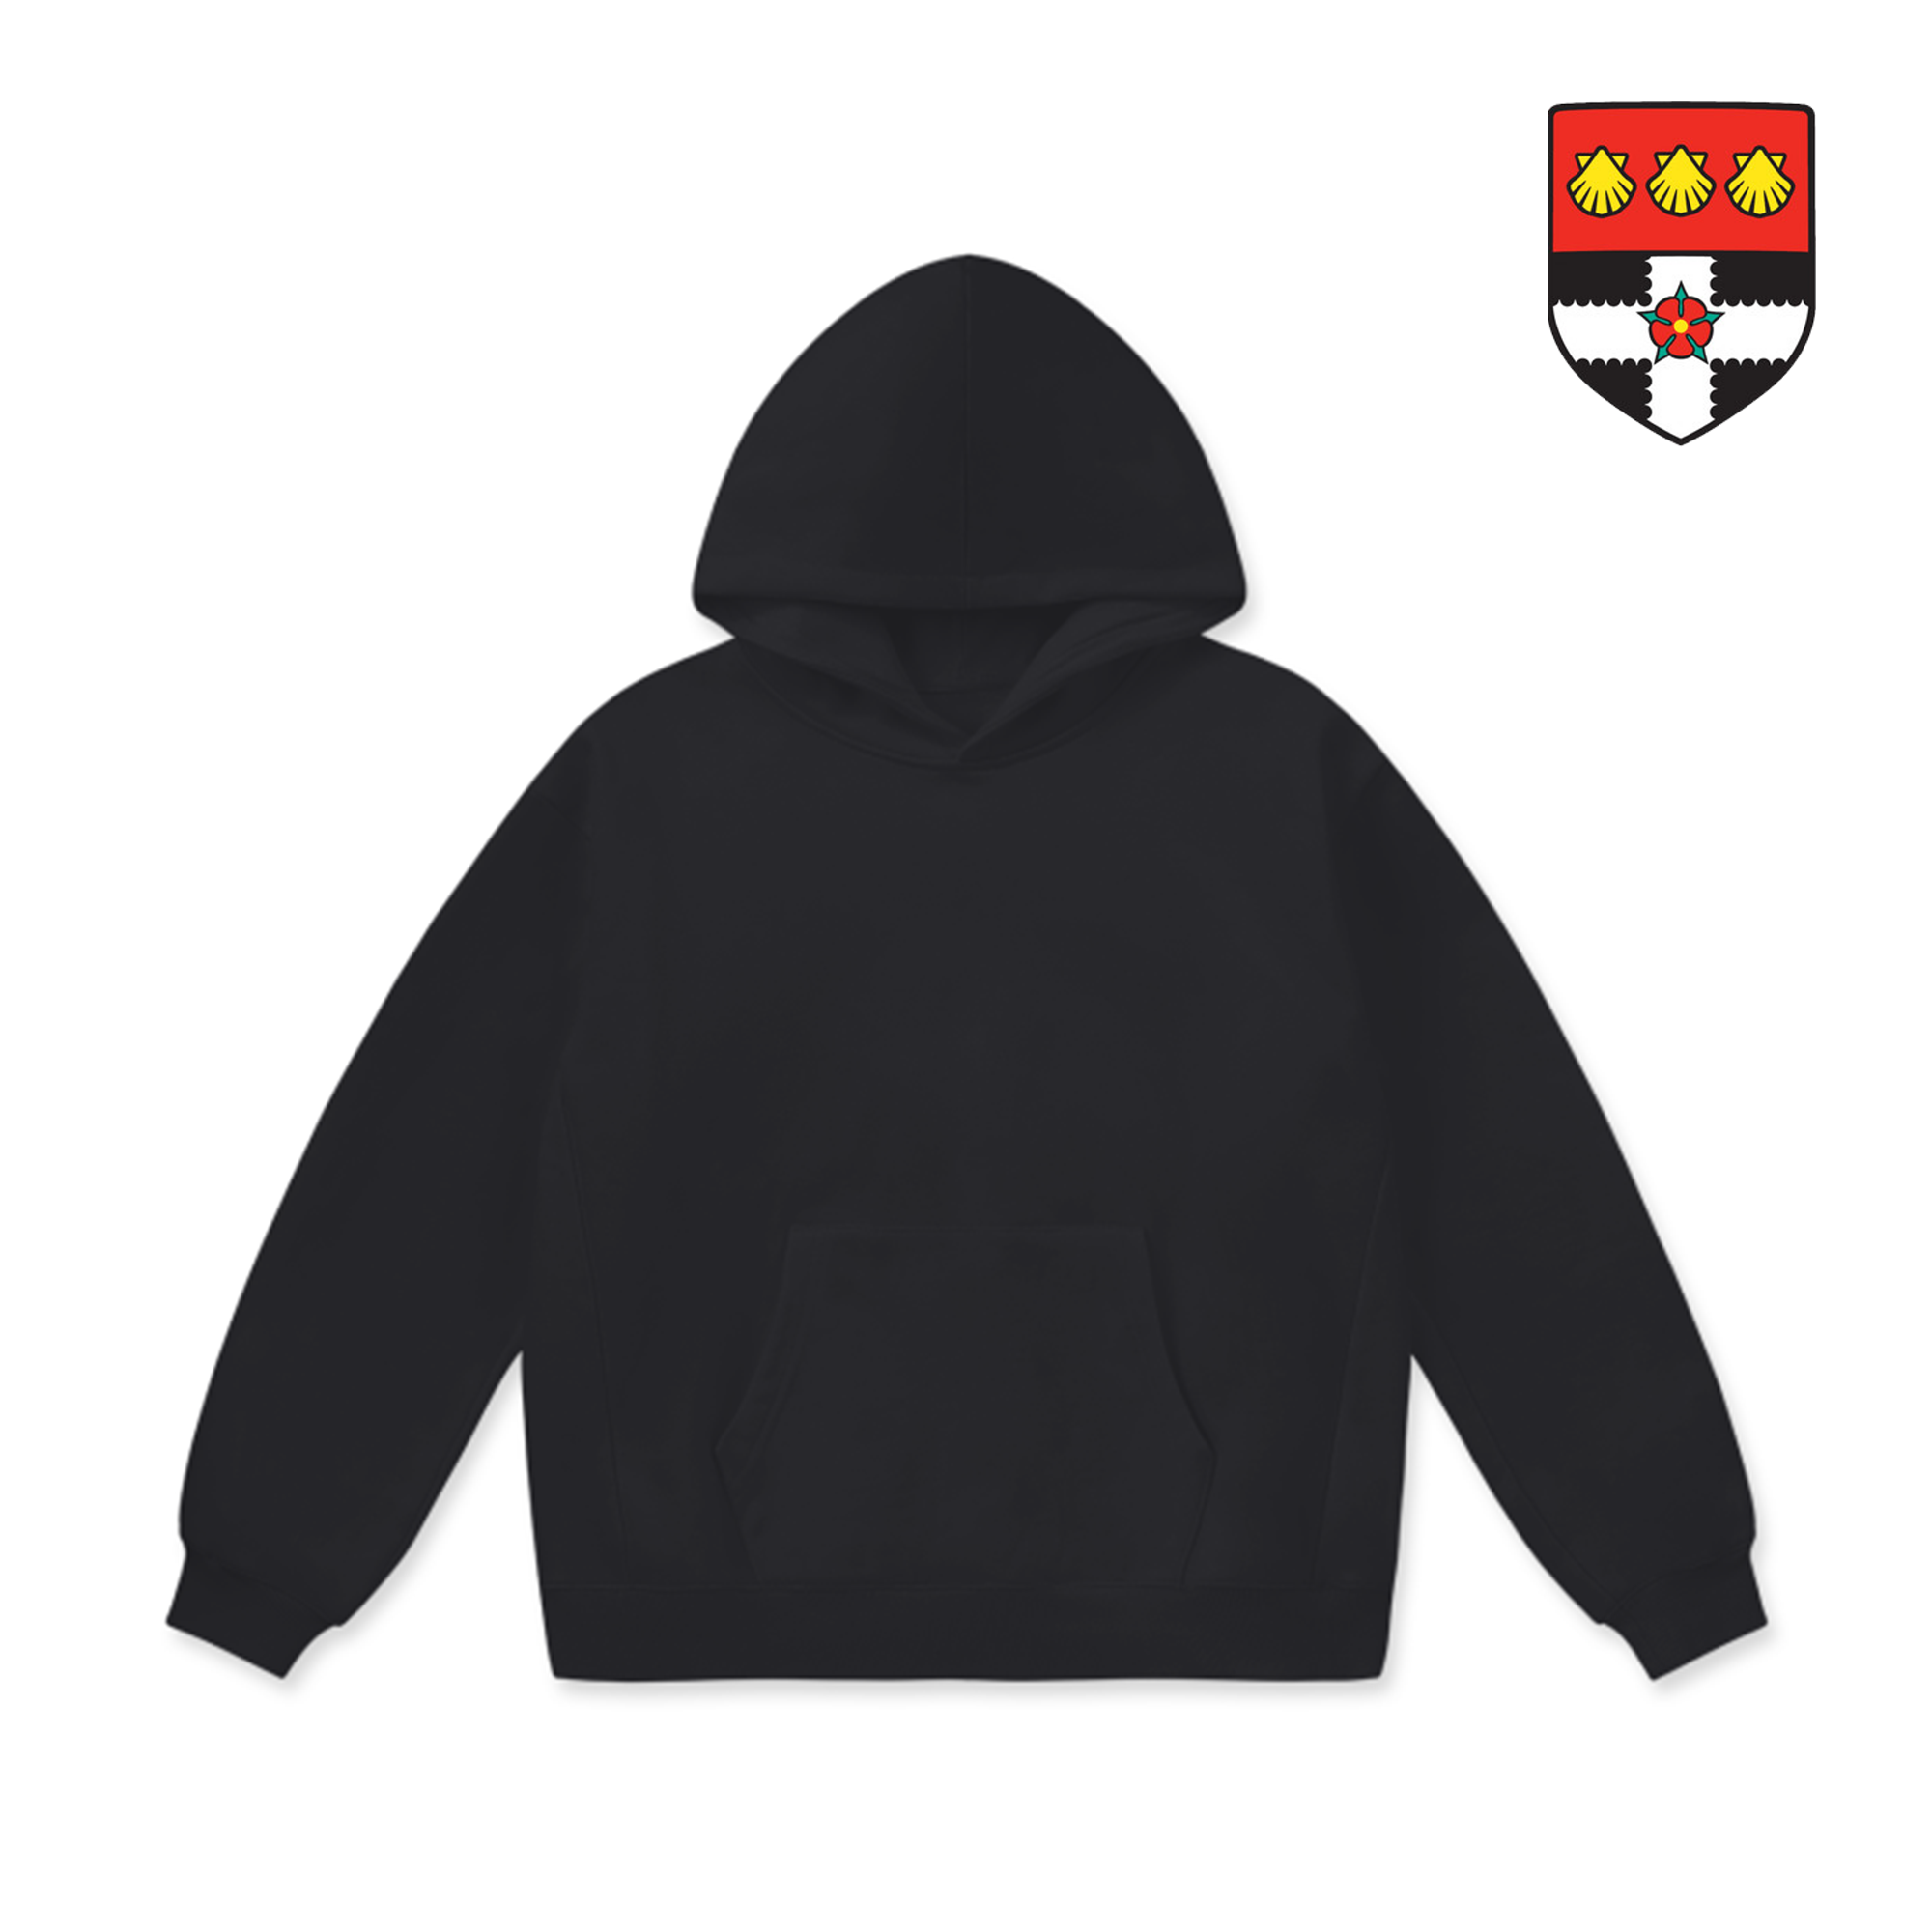 LCC Super Weighted Hoodie - University of Reading (Classic)